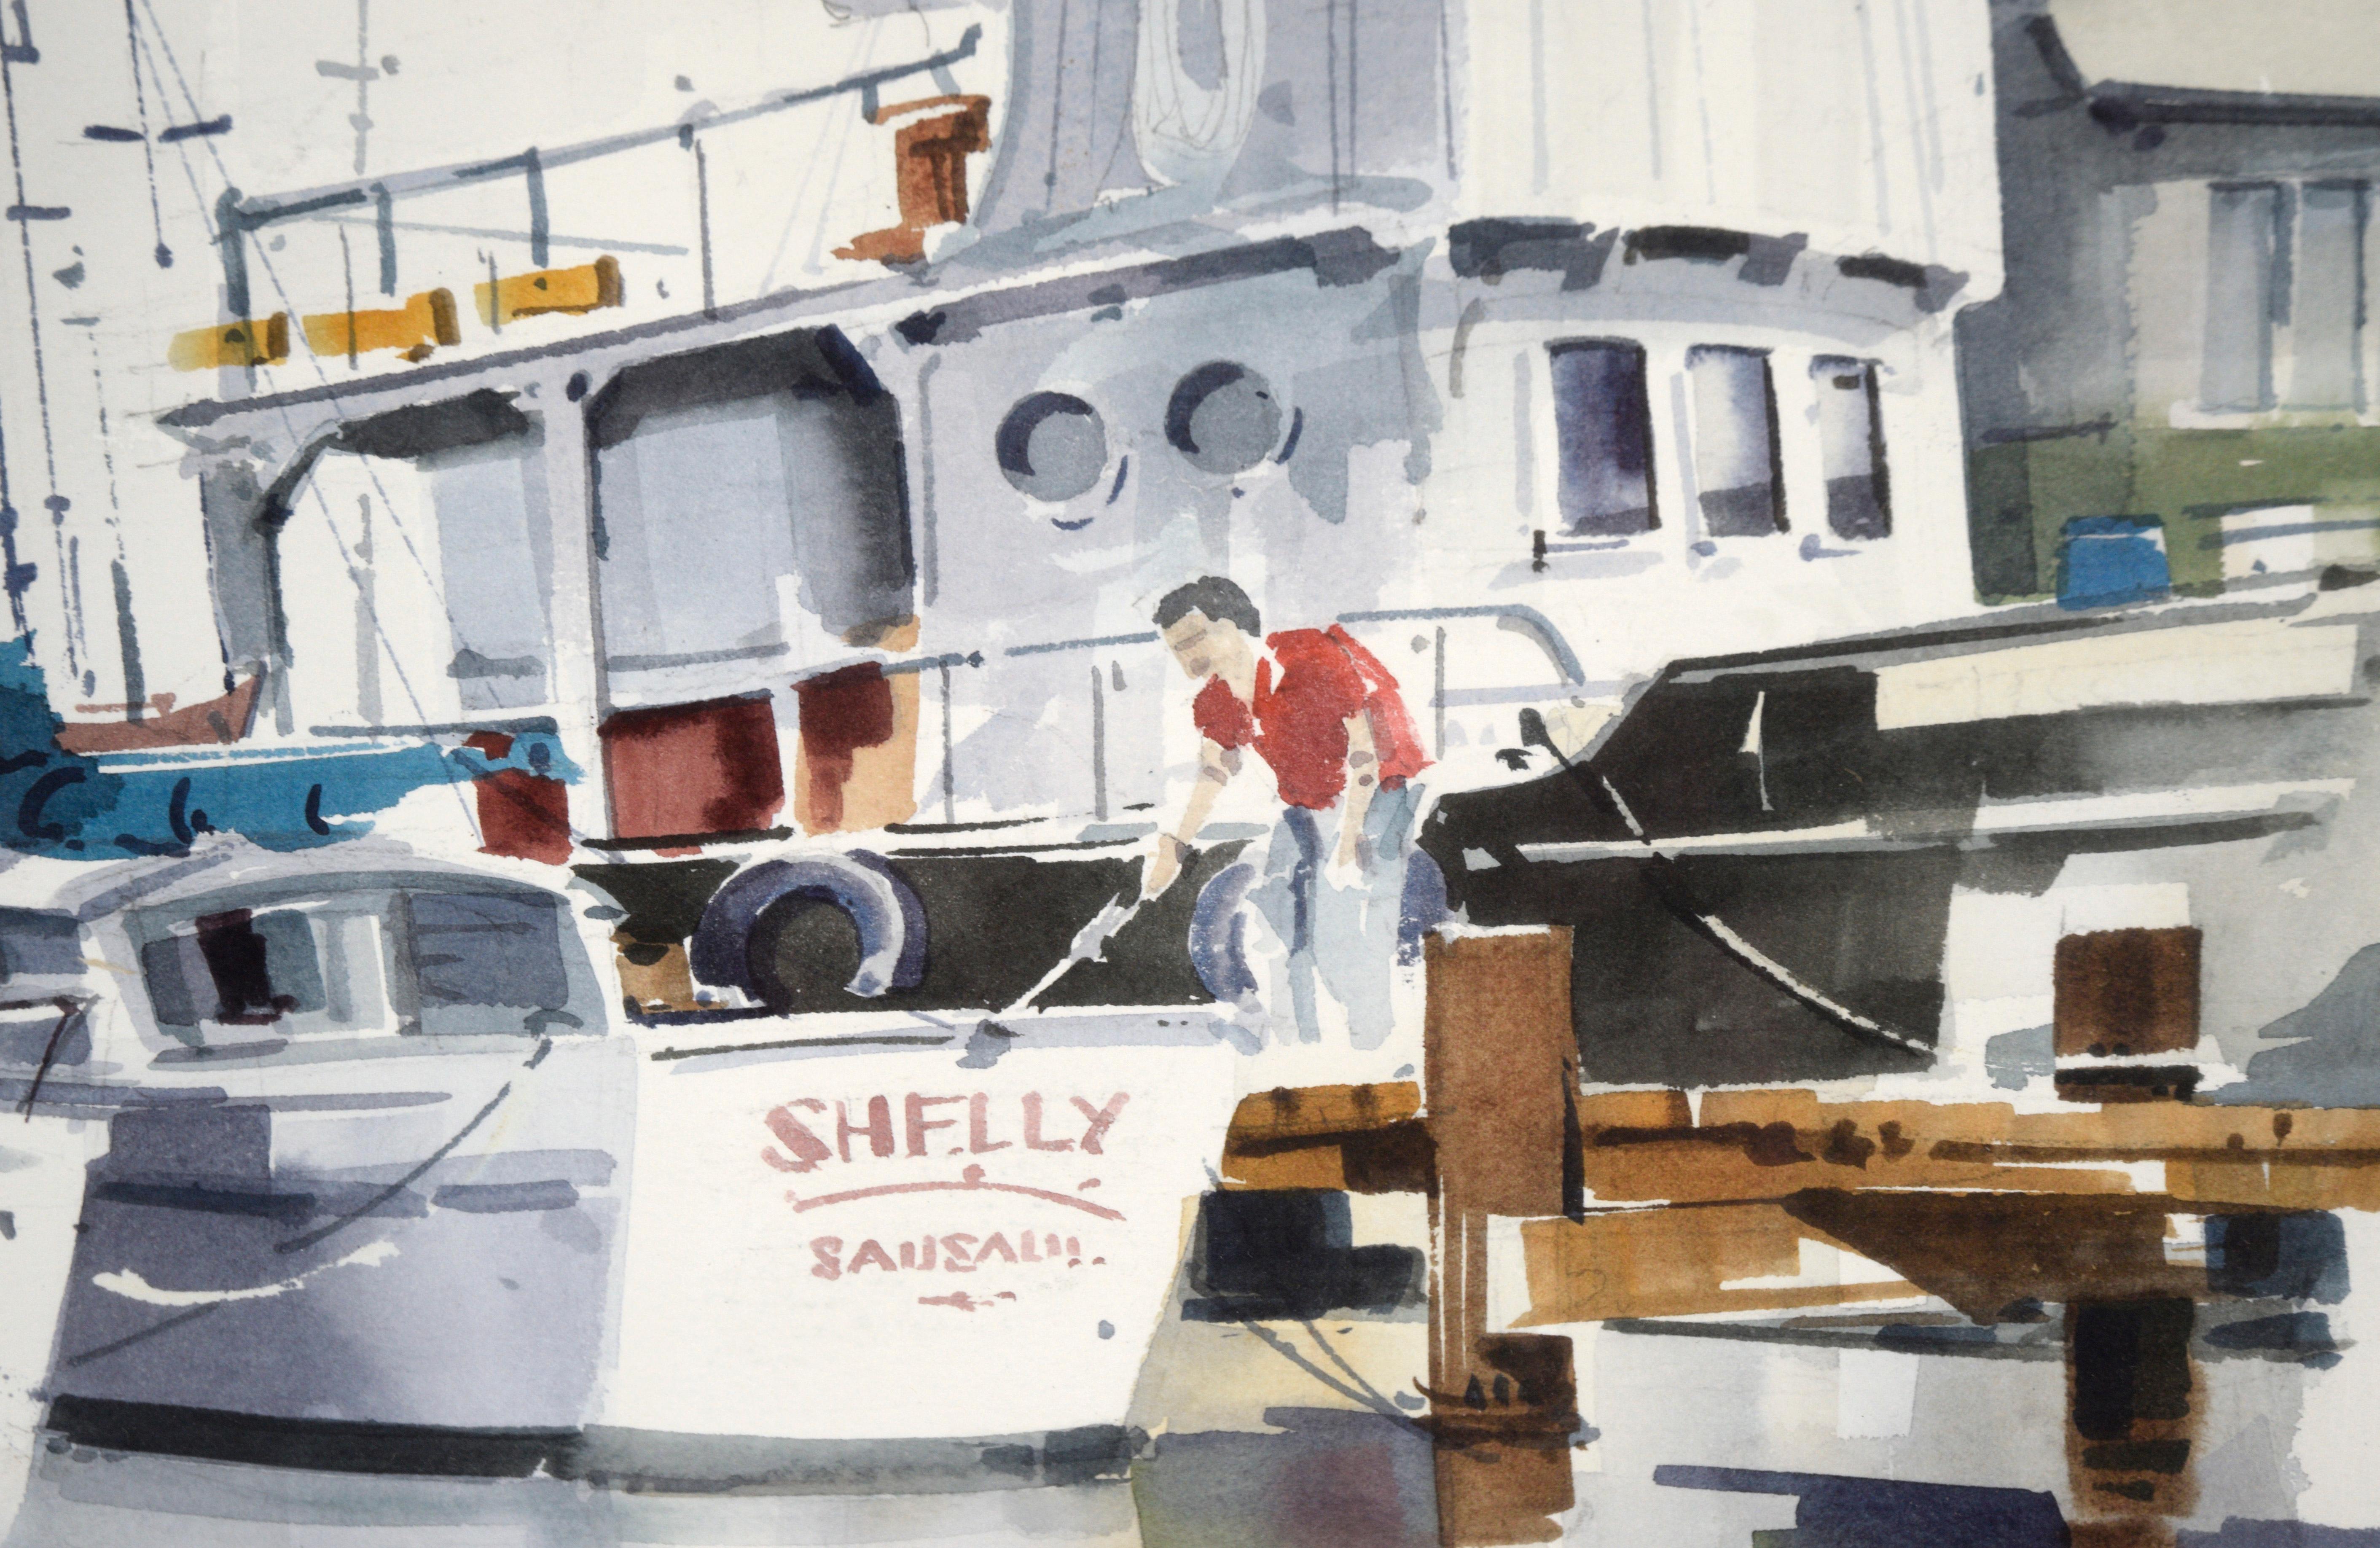 Boats at Sausalito Harbor - Watercolor on Paper - Beige Landscape Painting by Ralsten